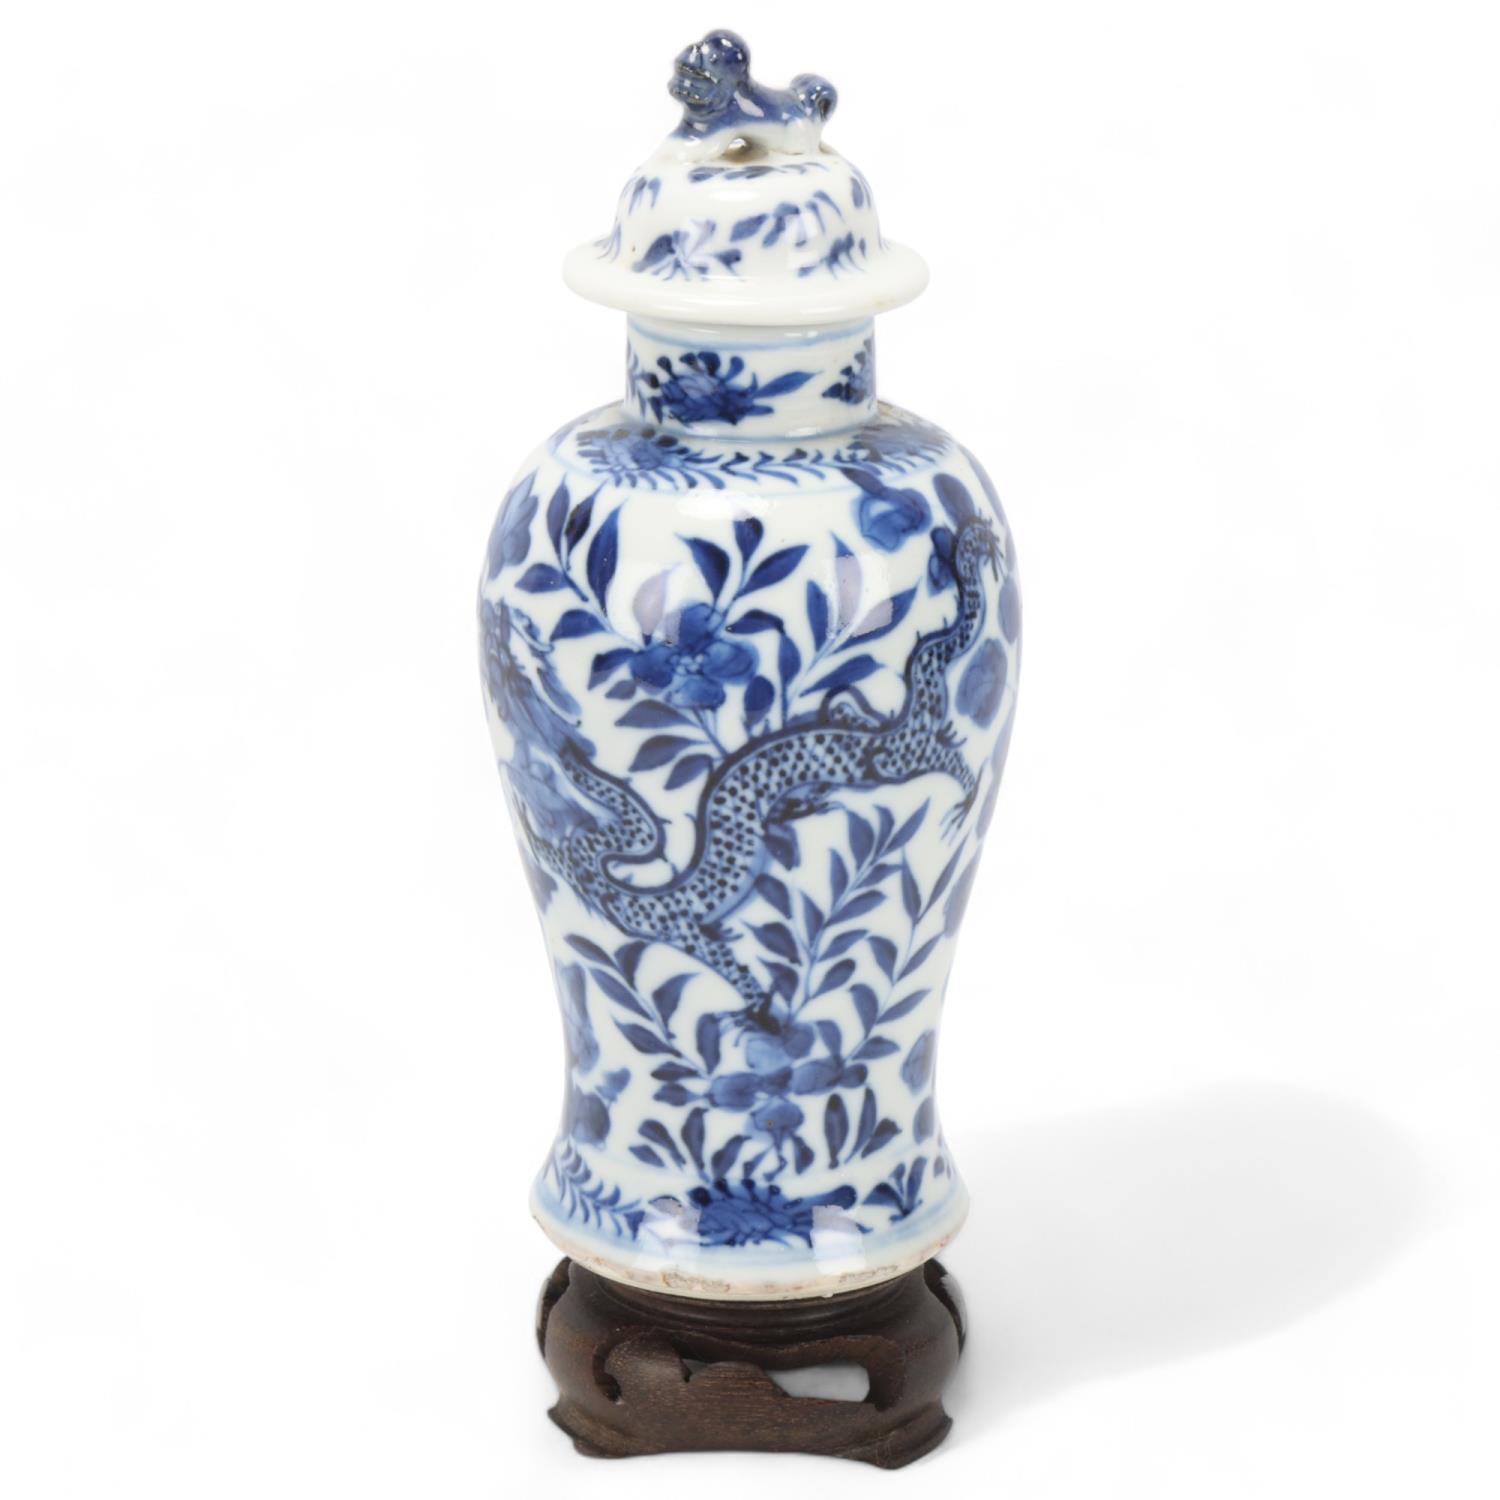 Chinese blue and white porcelain jar and cover, dragon decoration, 4-character mark, overall